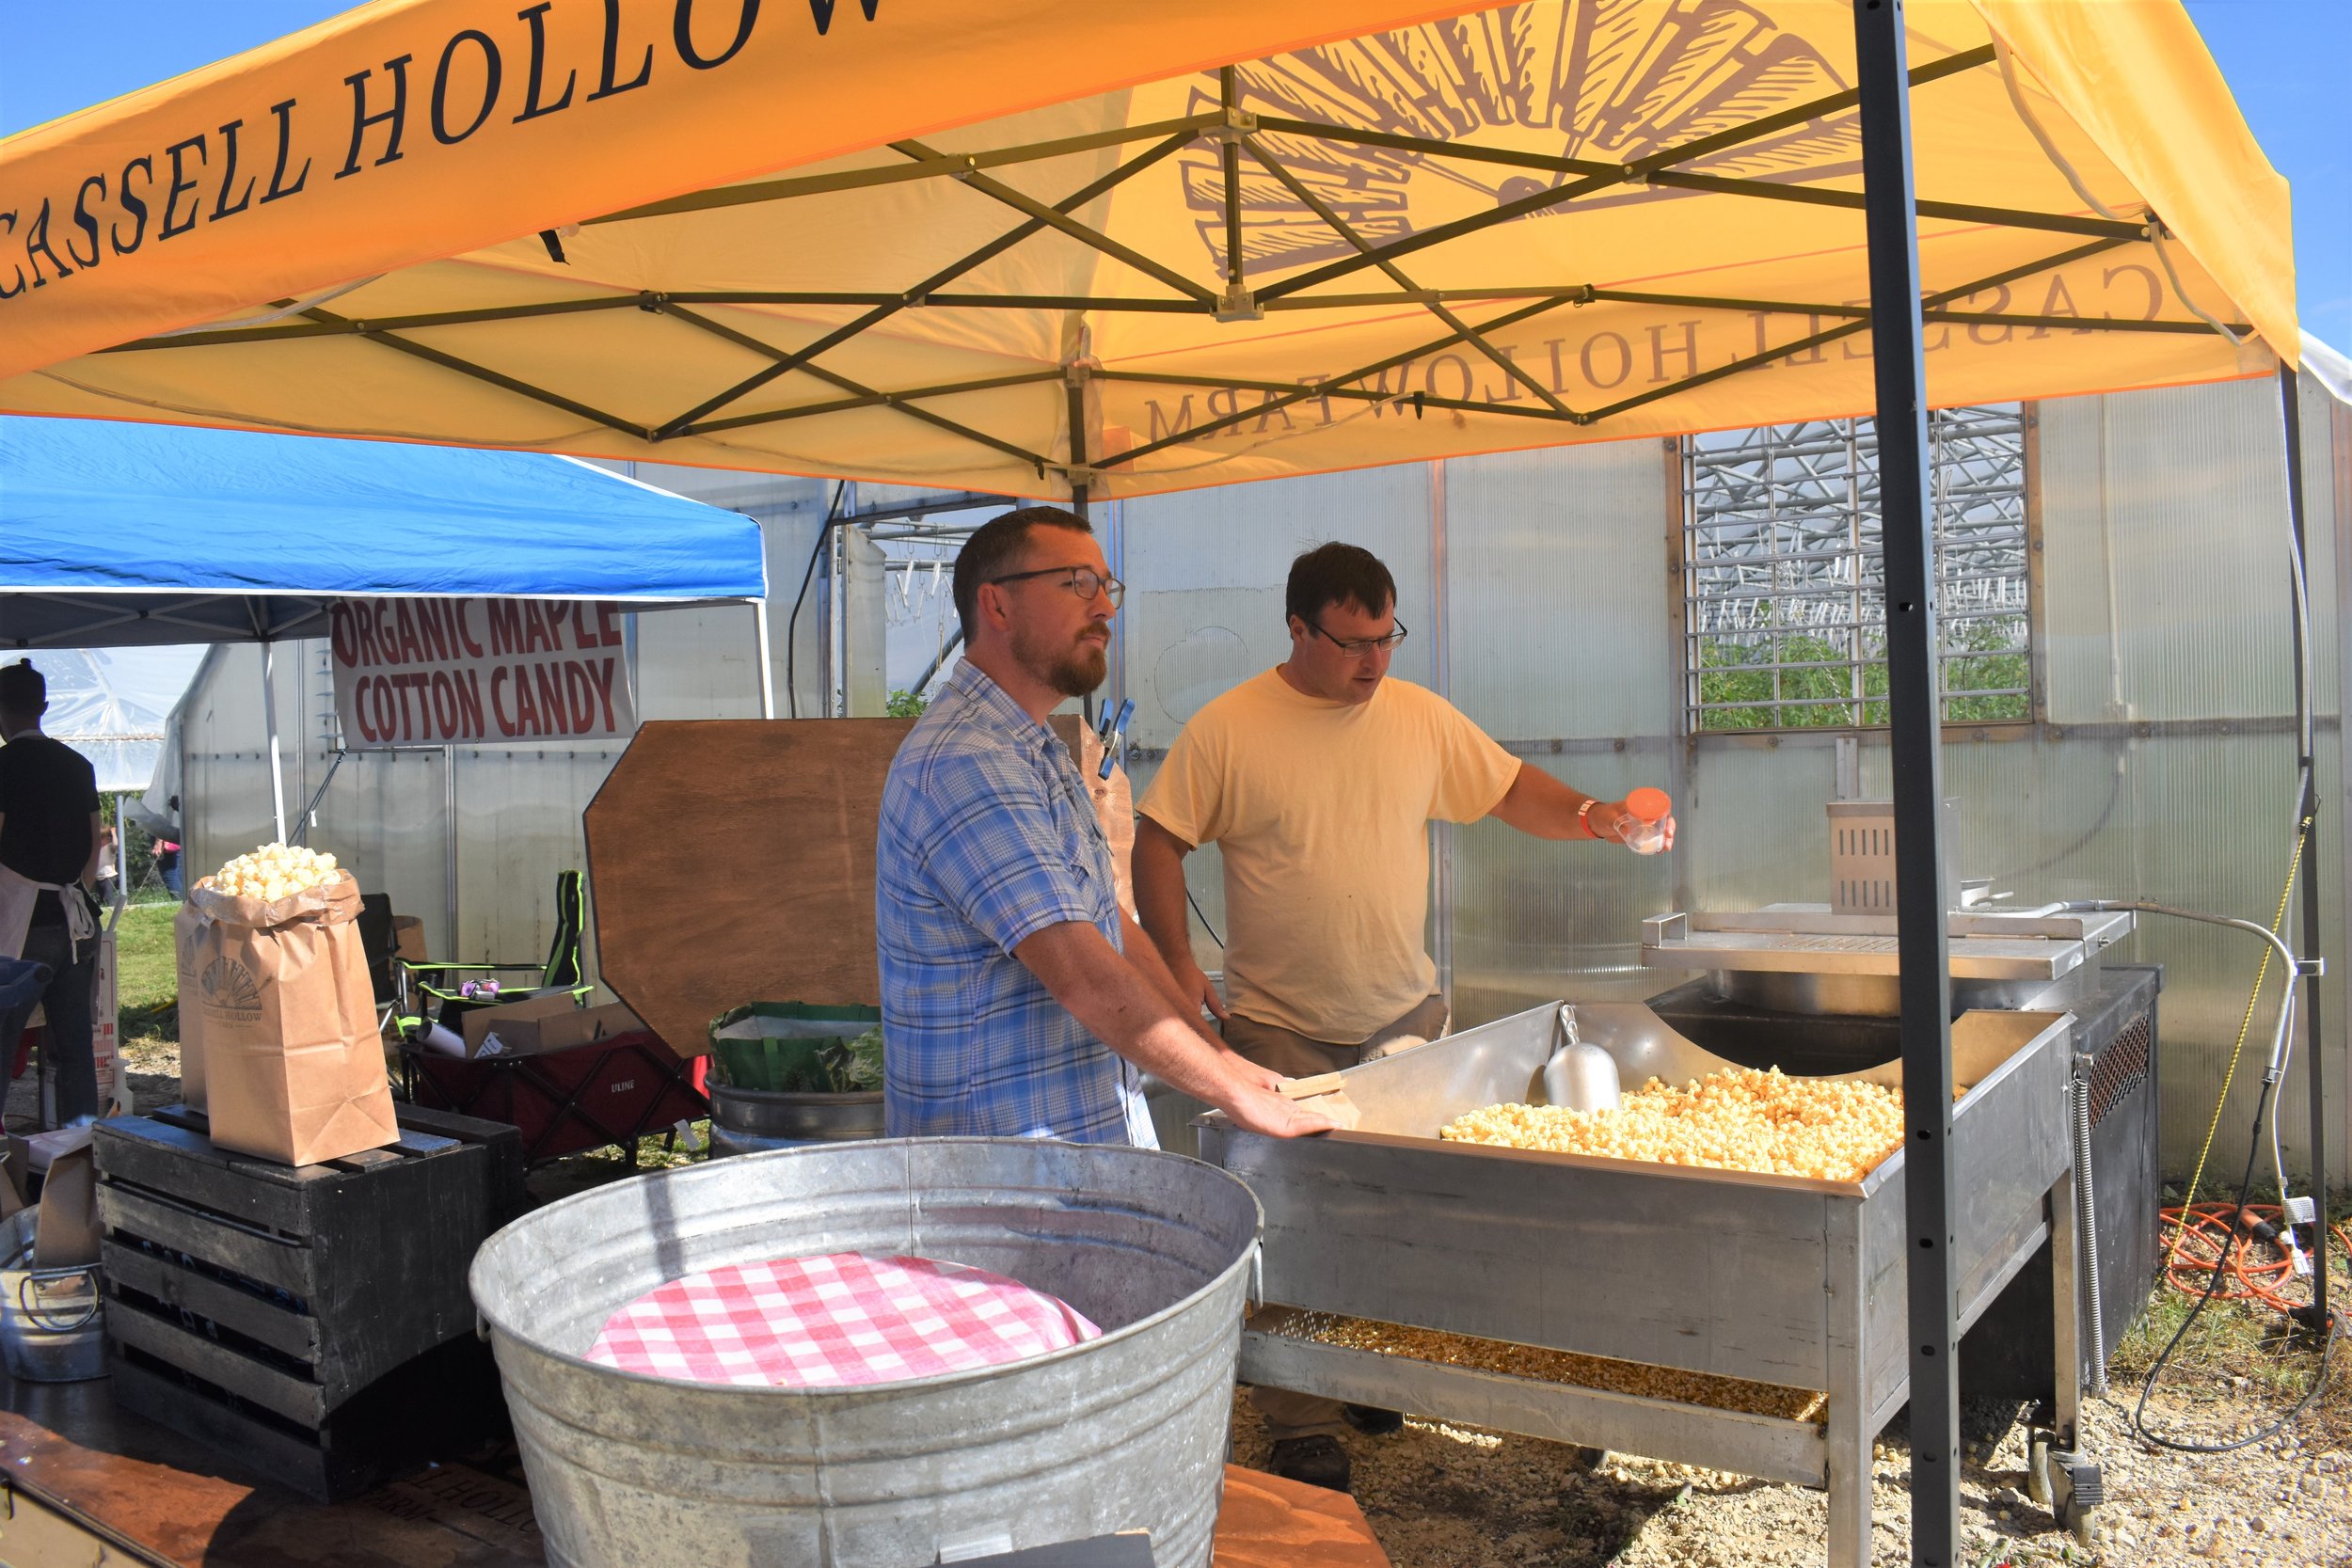  Cassell Hollow Farm serving up maple popcorn 